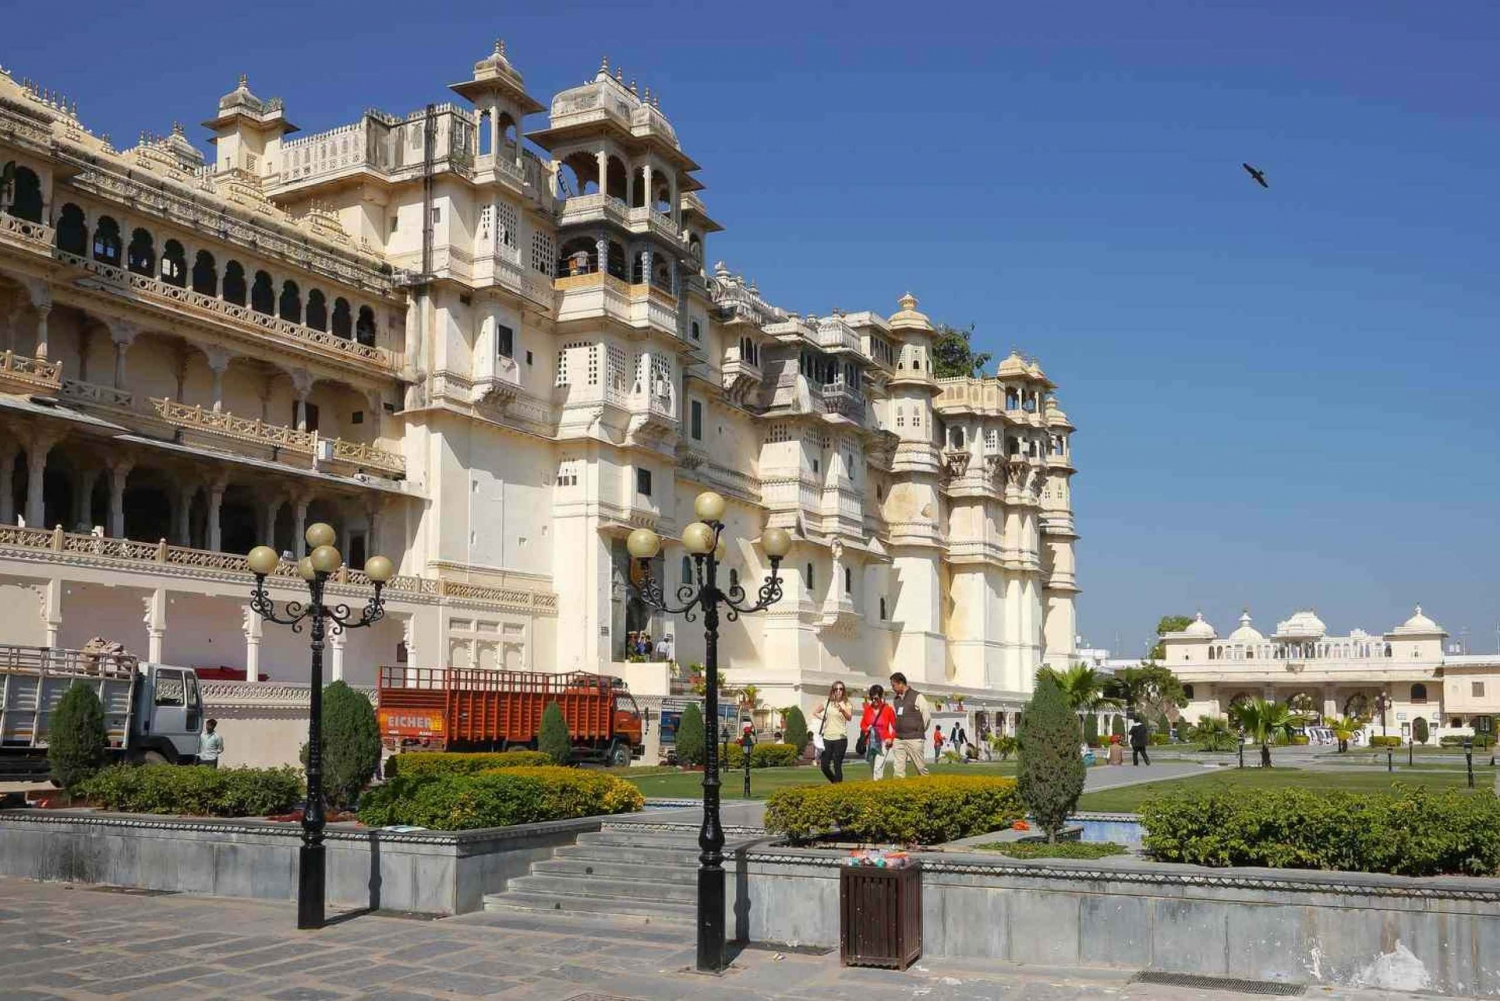 Stroll-Through-the-Magical-City-Palace-in-Udaipur